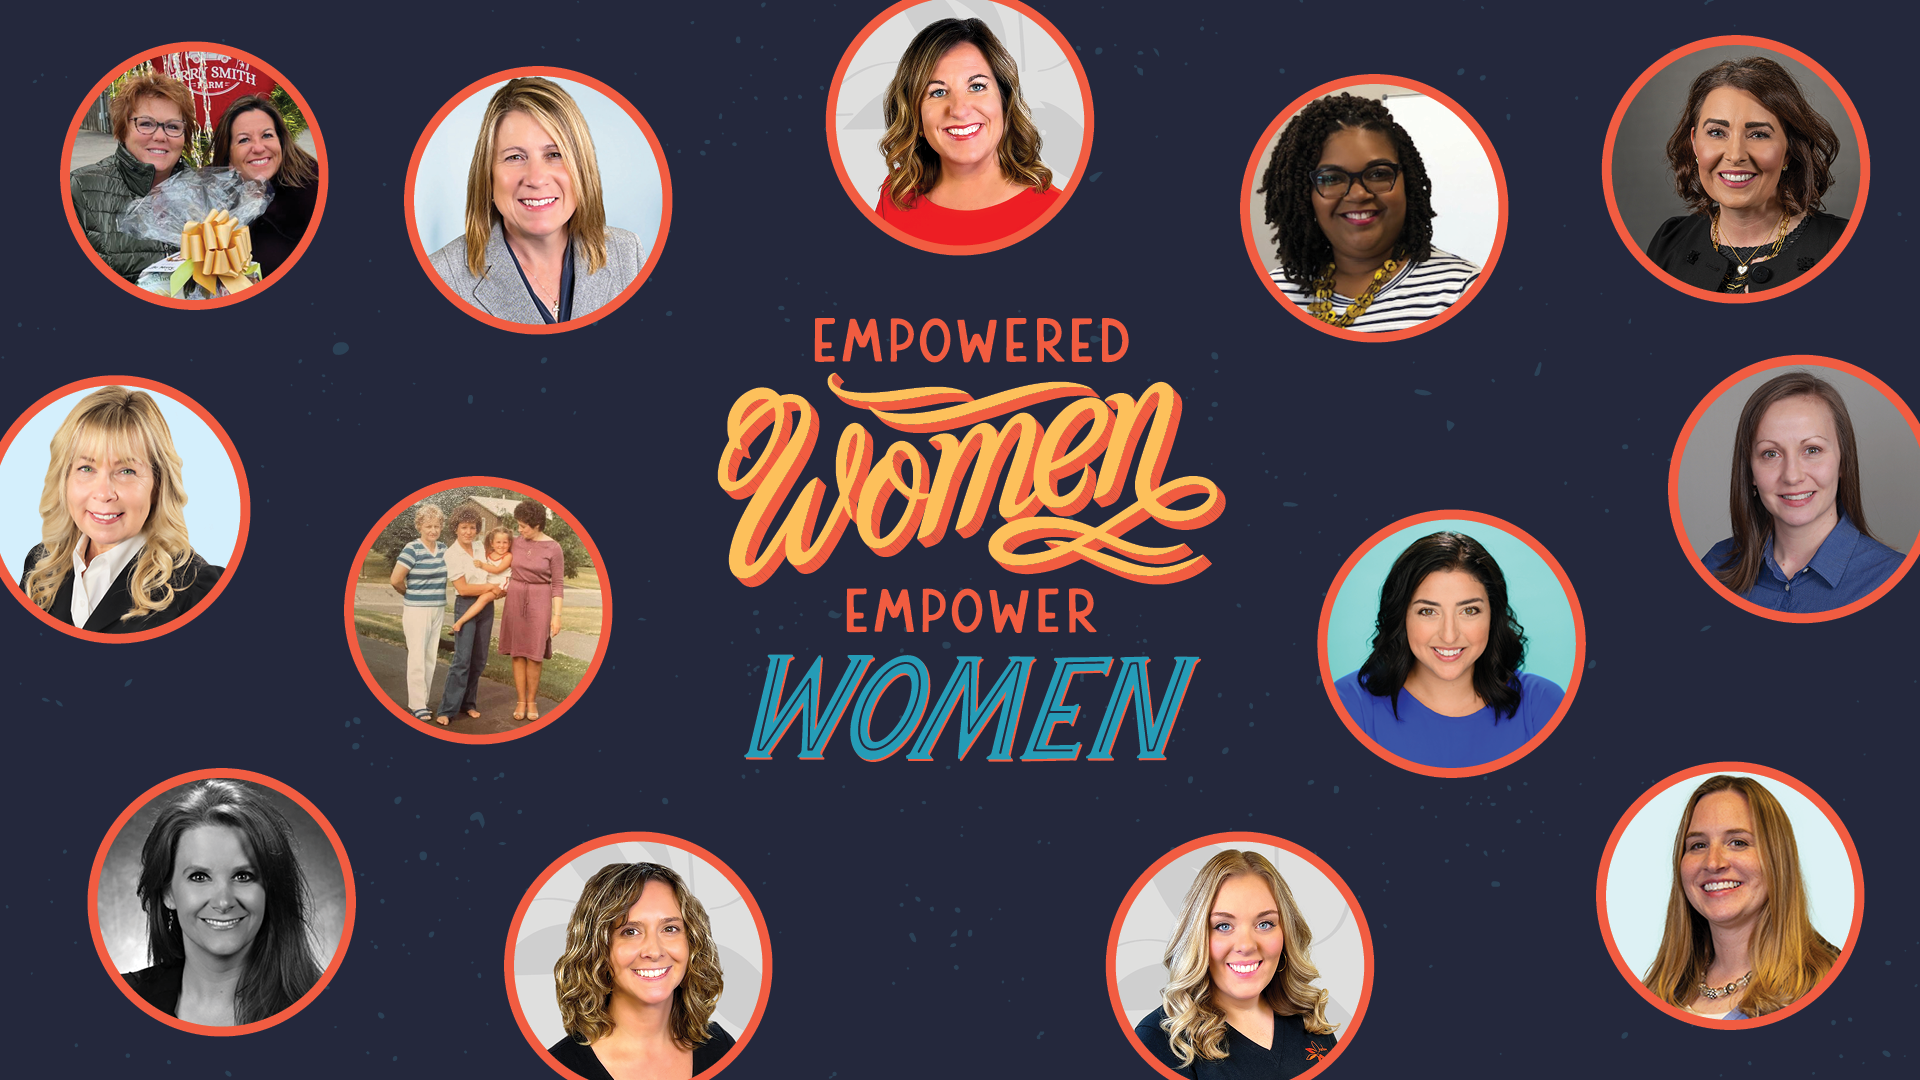 Photo collage of all the women mentioned and the text "Empowered Women Empower Women"